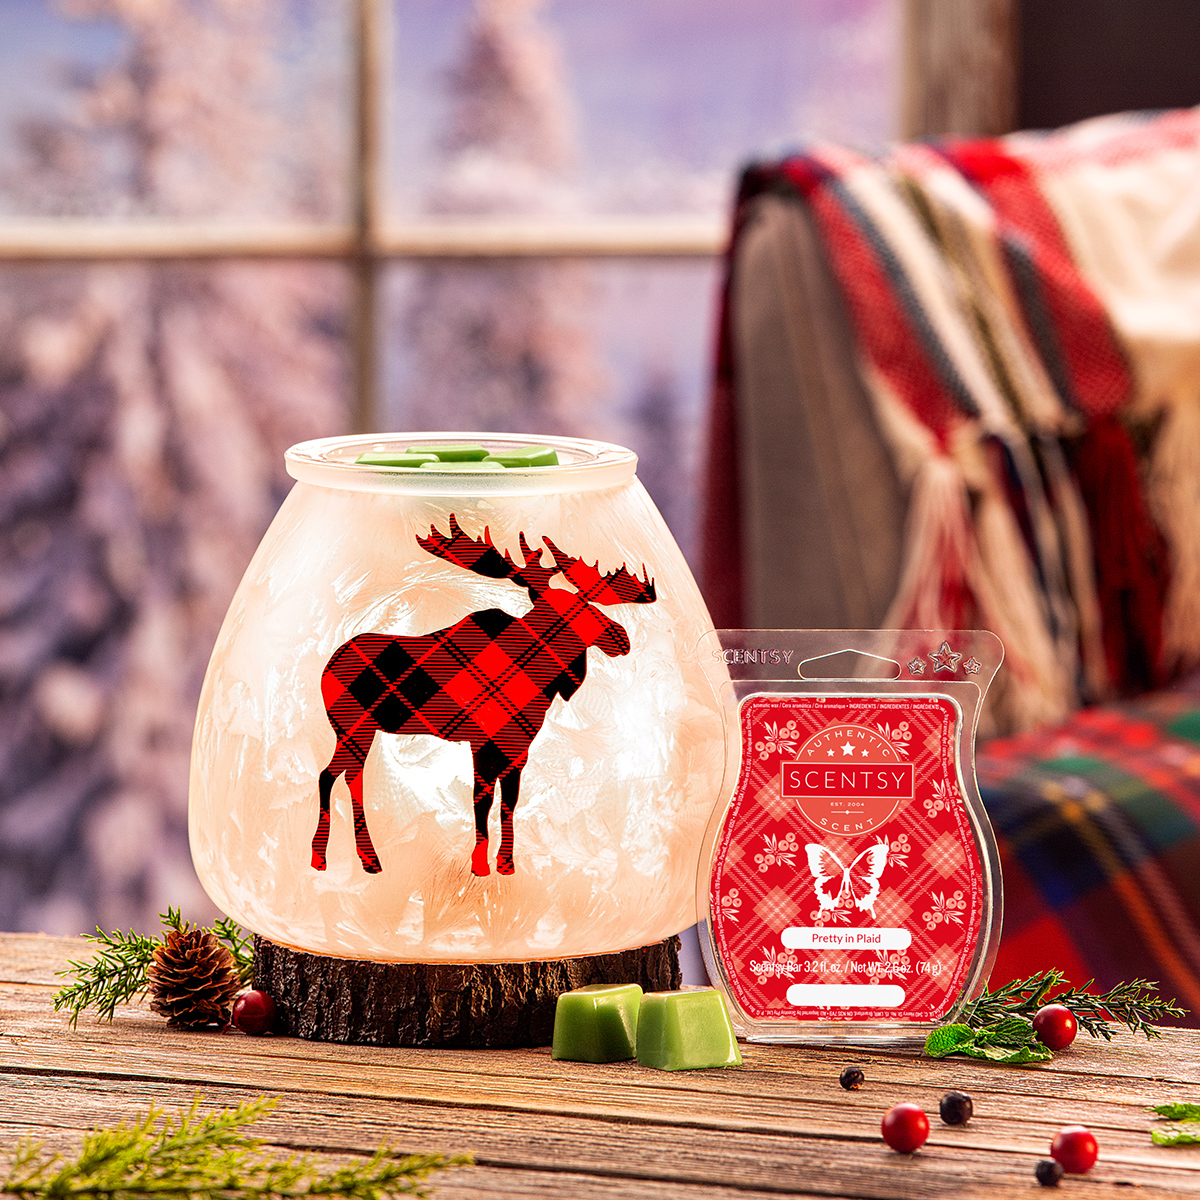 Scentsy Warmer of the Month and Monthly Specials The Safest Candles